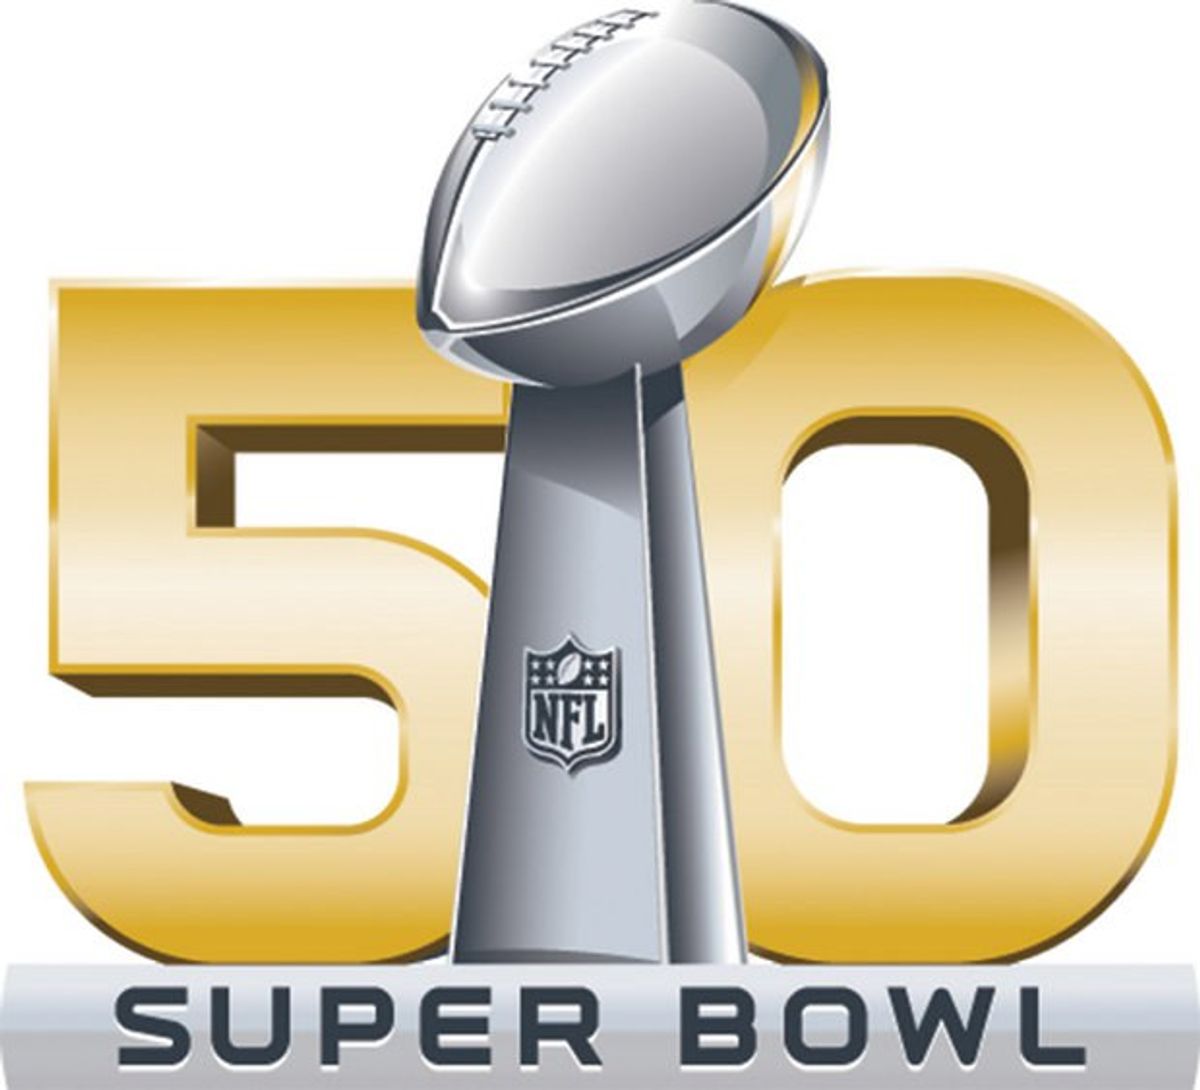 Super Bowl 50: Commercials And Our Always-on Society